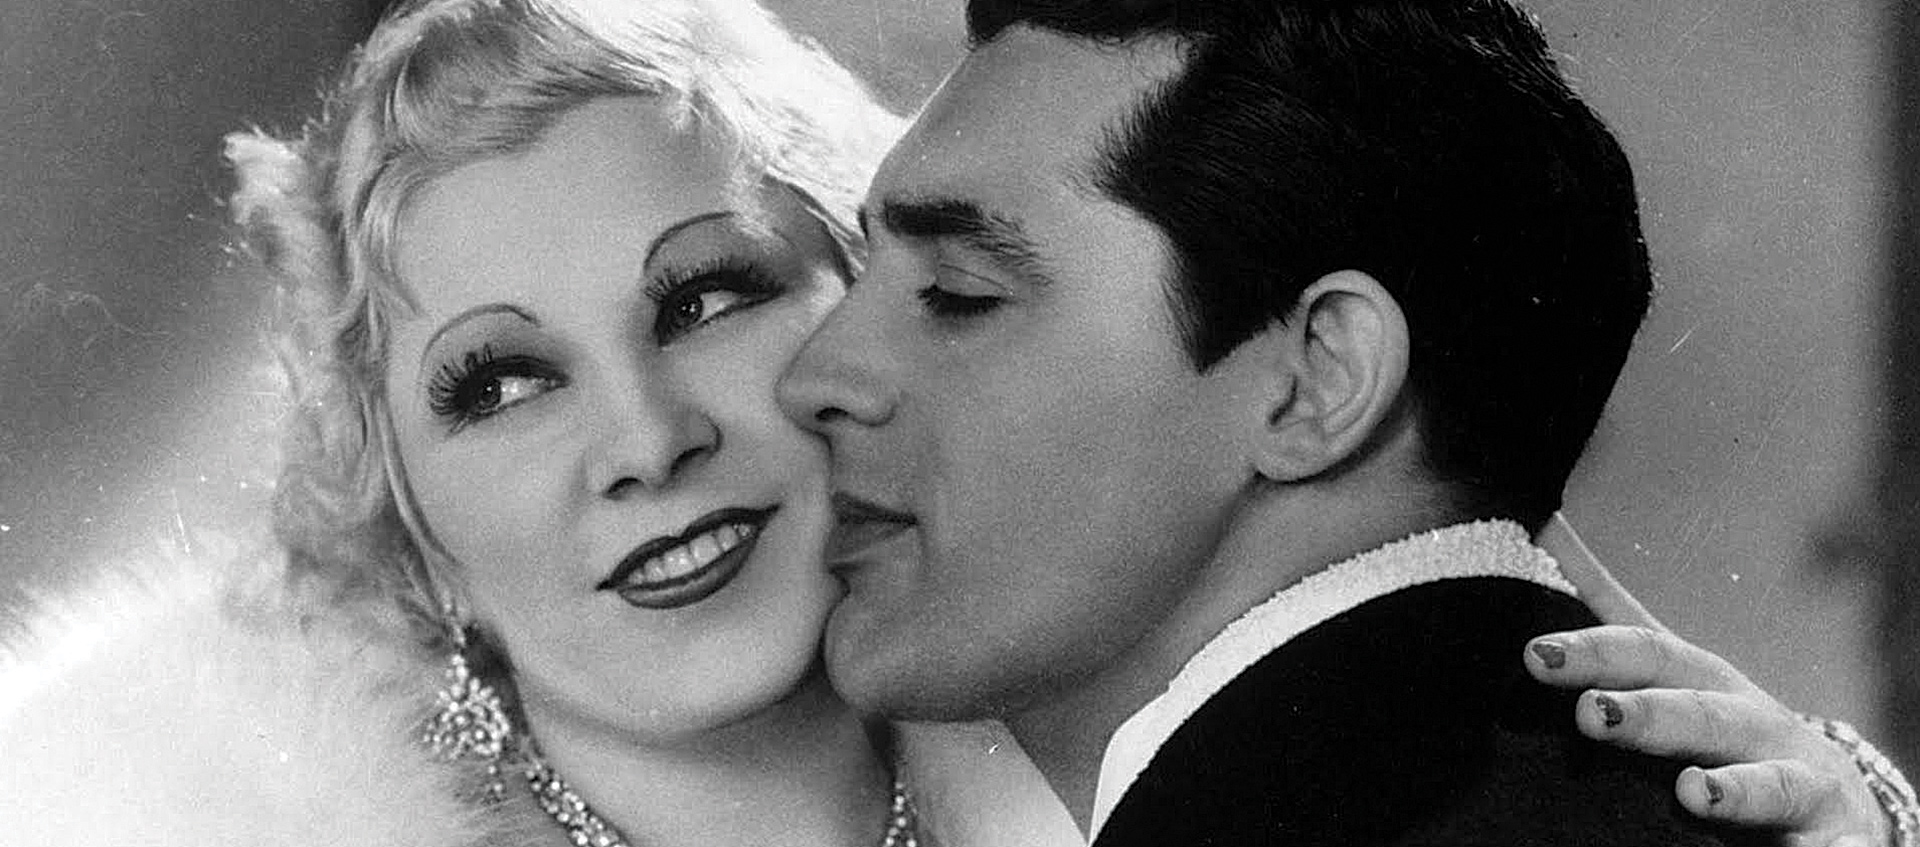 Cary Grant kisses the cheek of a smiling Mae West in a scene from the 1933 film I'm No Angel